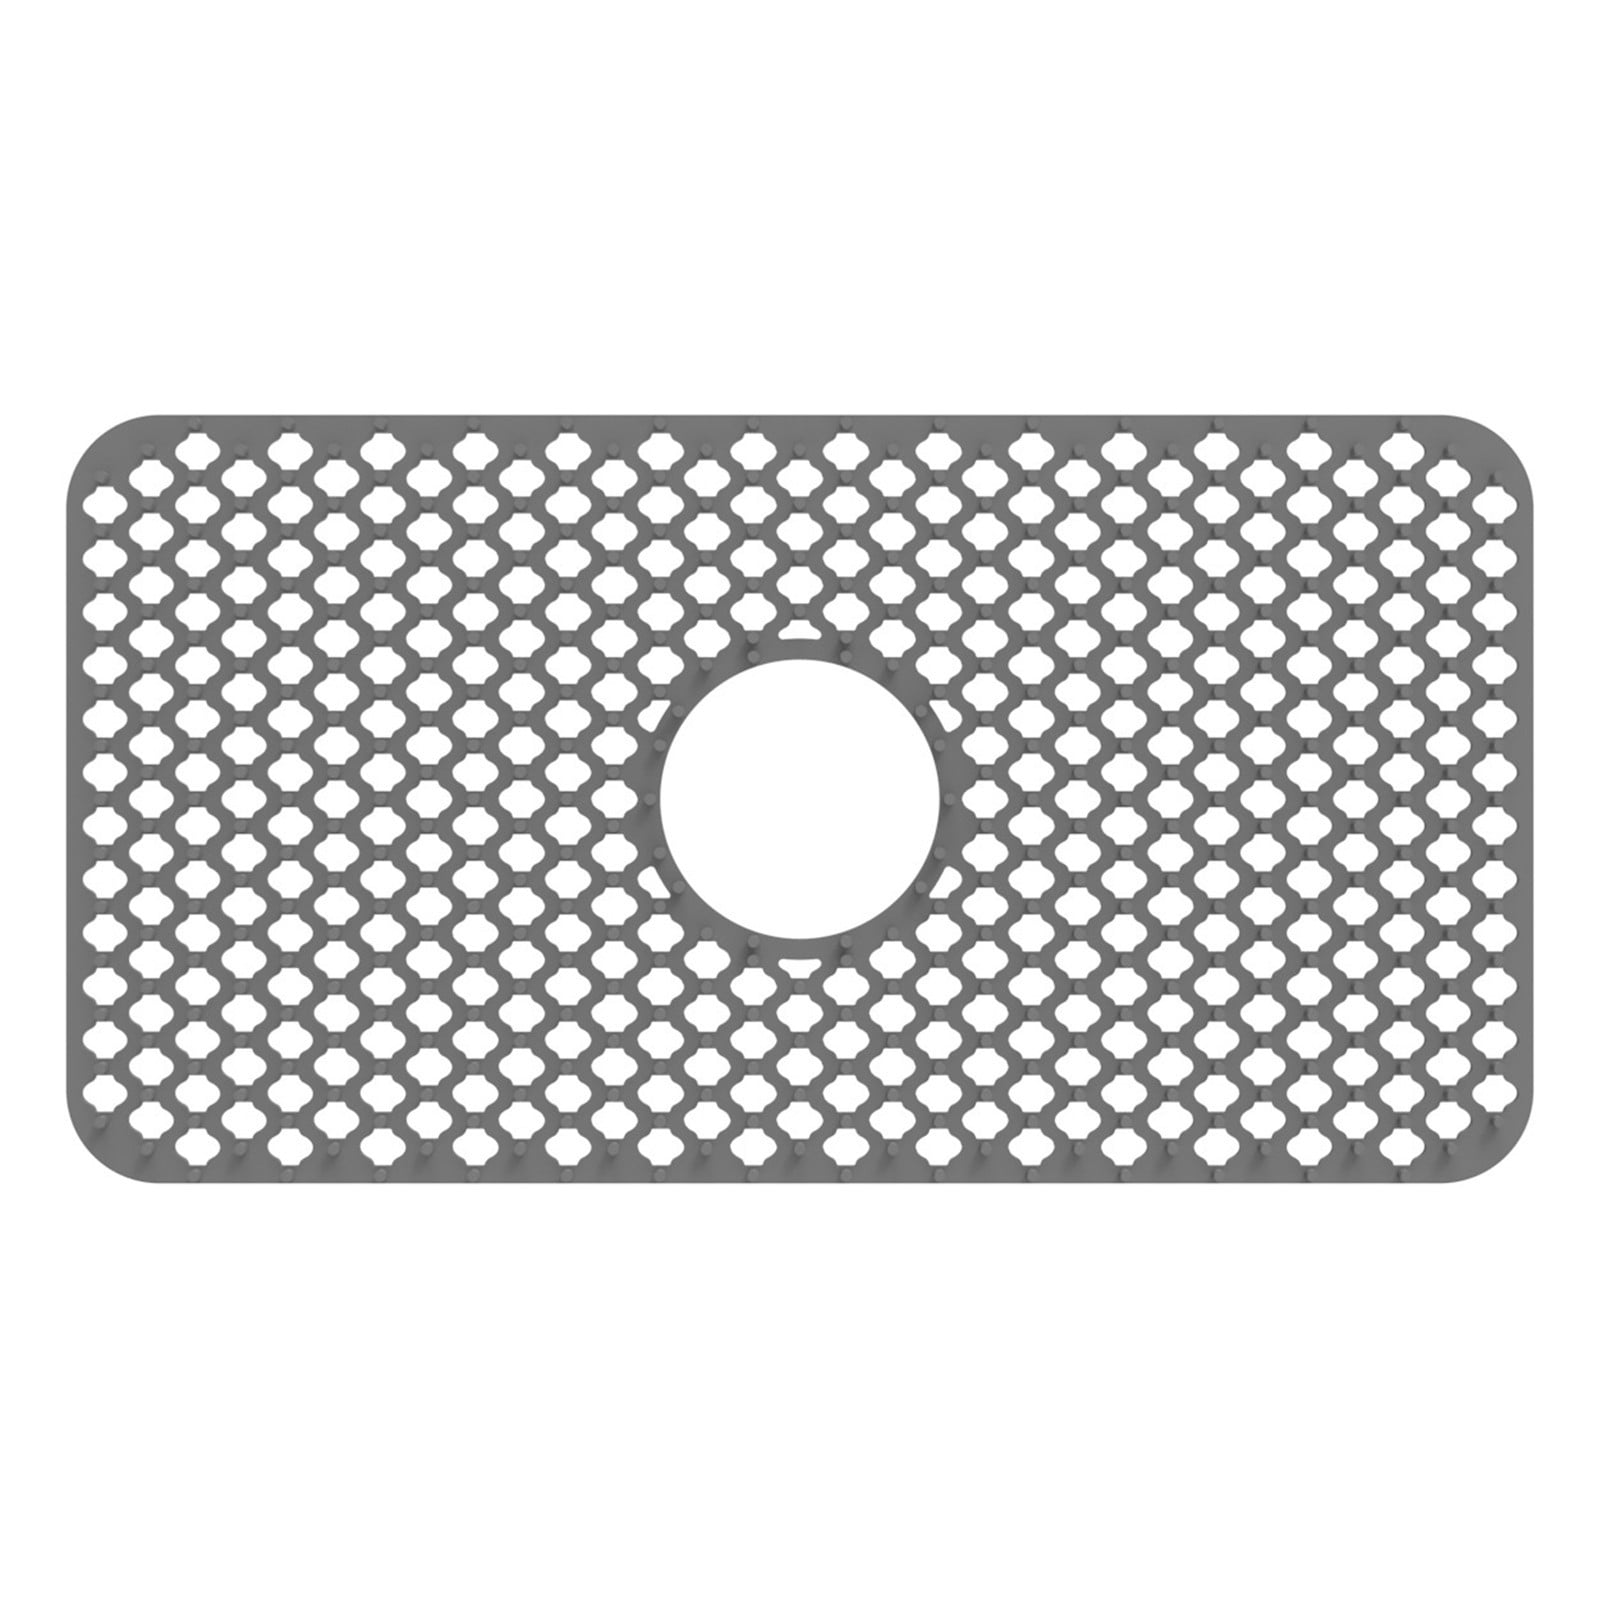 Silicone Sink Mat Rear Kitchen Sink Protector Accessory Folding Non-slip Sink  Mats For Bottom Of Stainless Steel Porcelain Sink